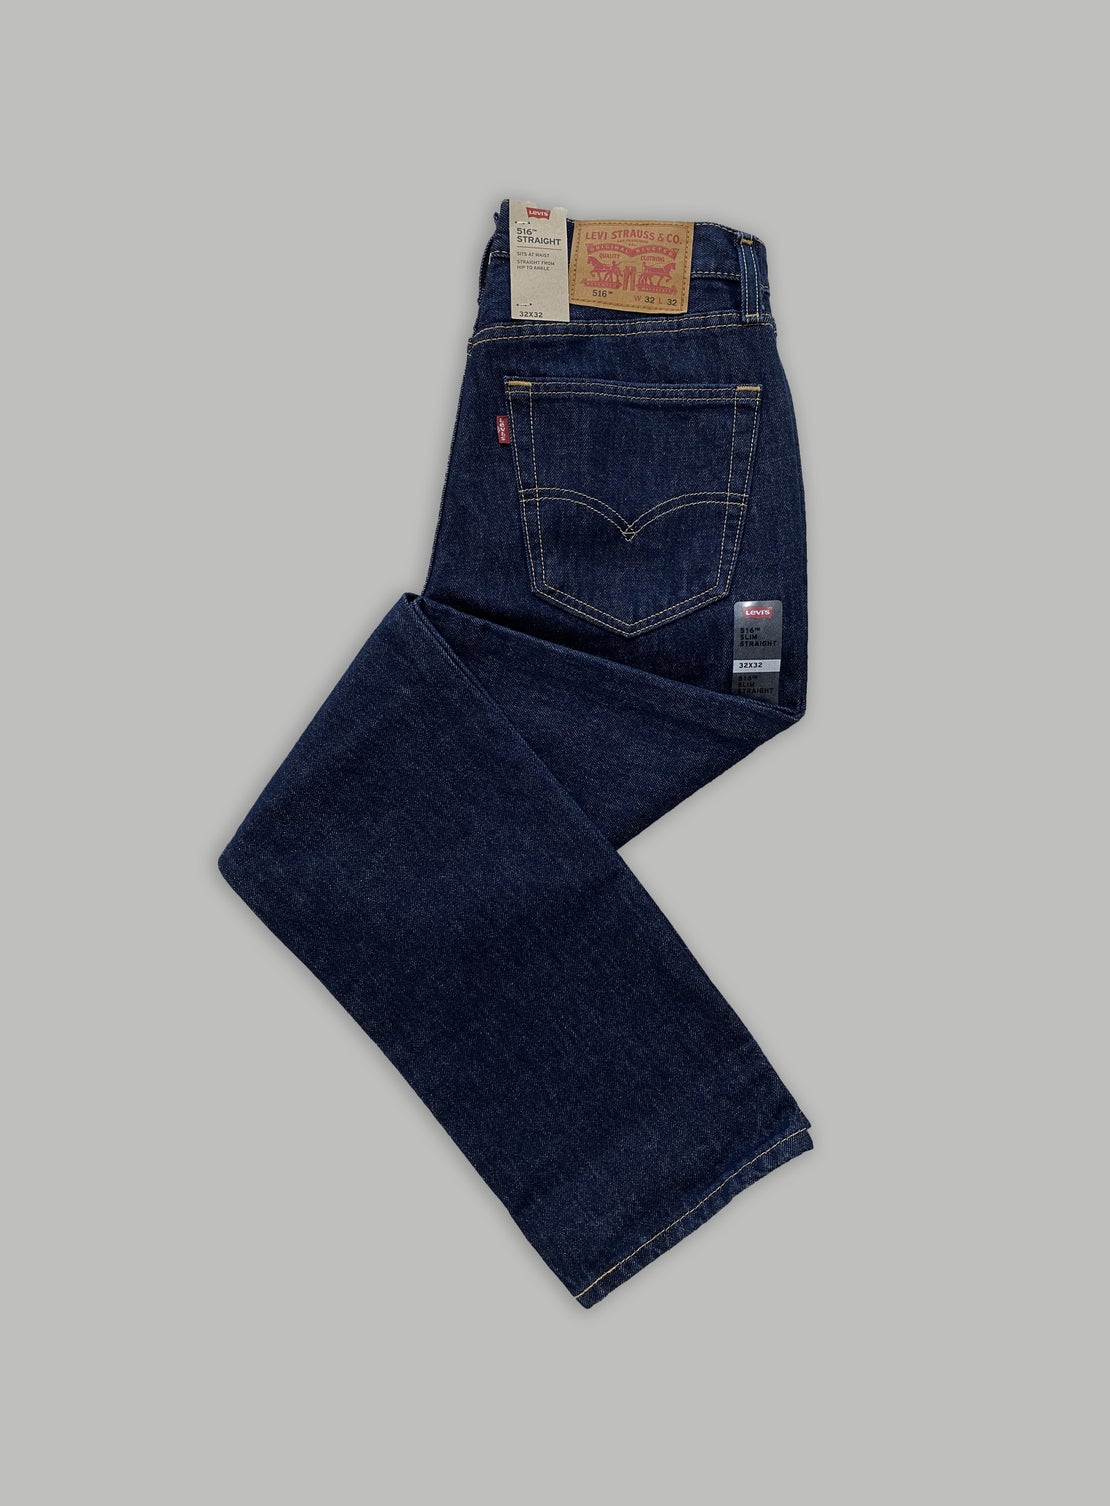 Levi's 516 Slim Straight - Rinse - Product - Working Style